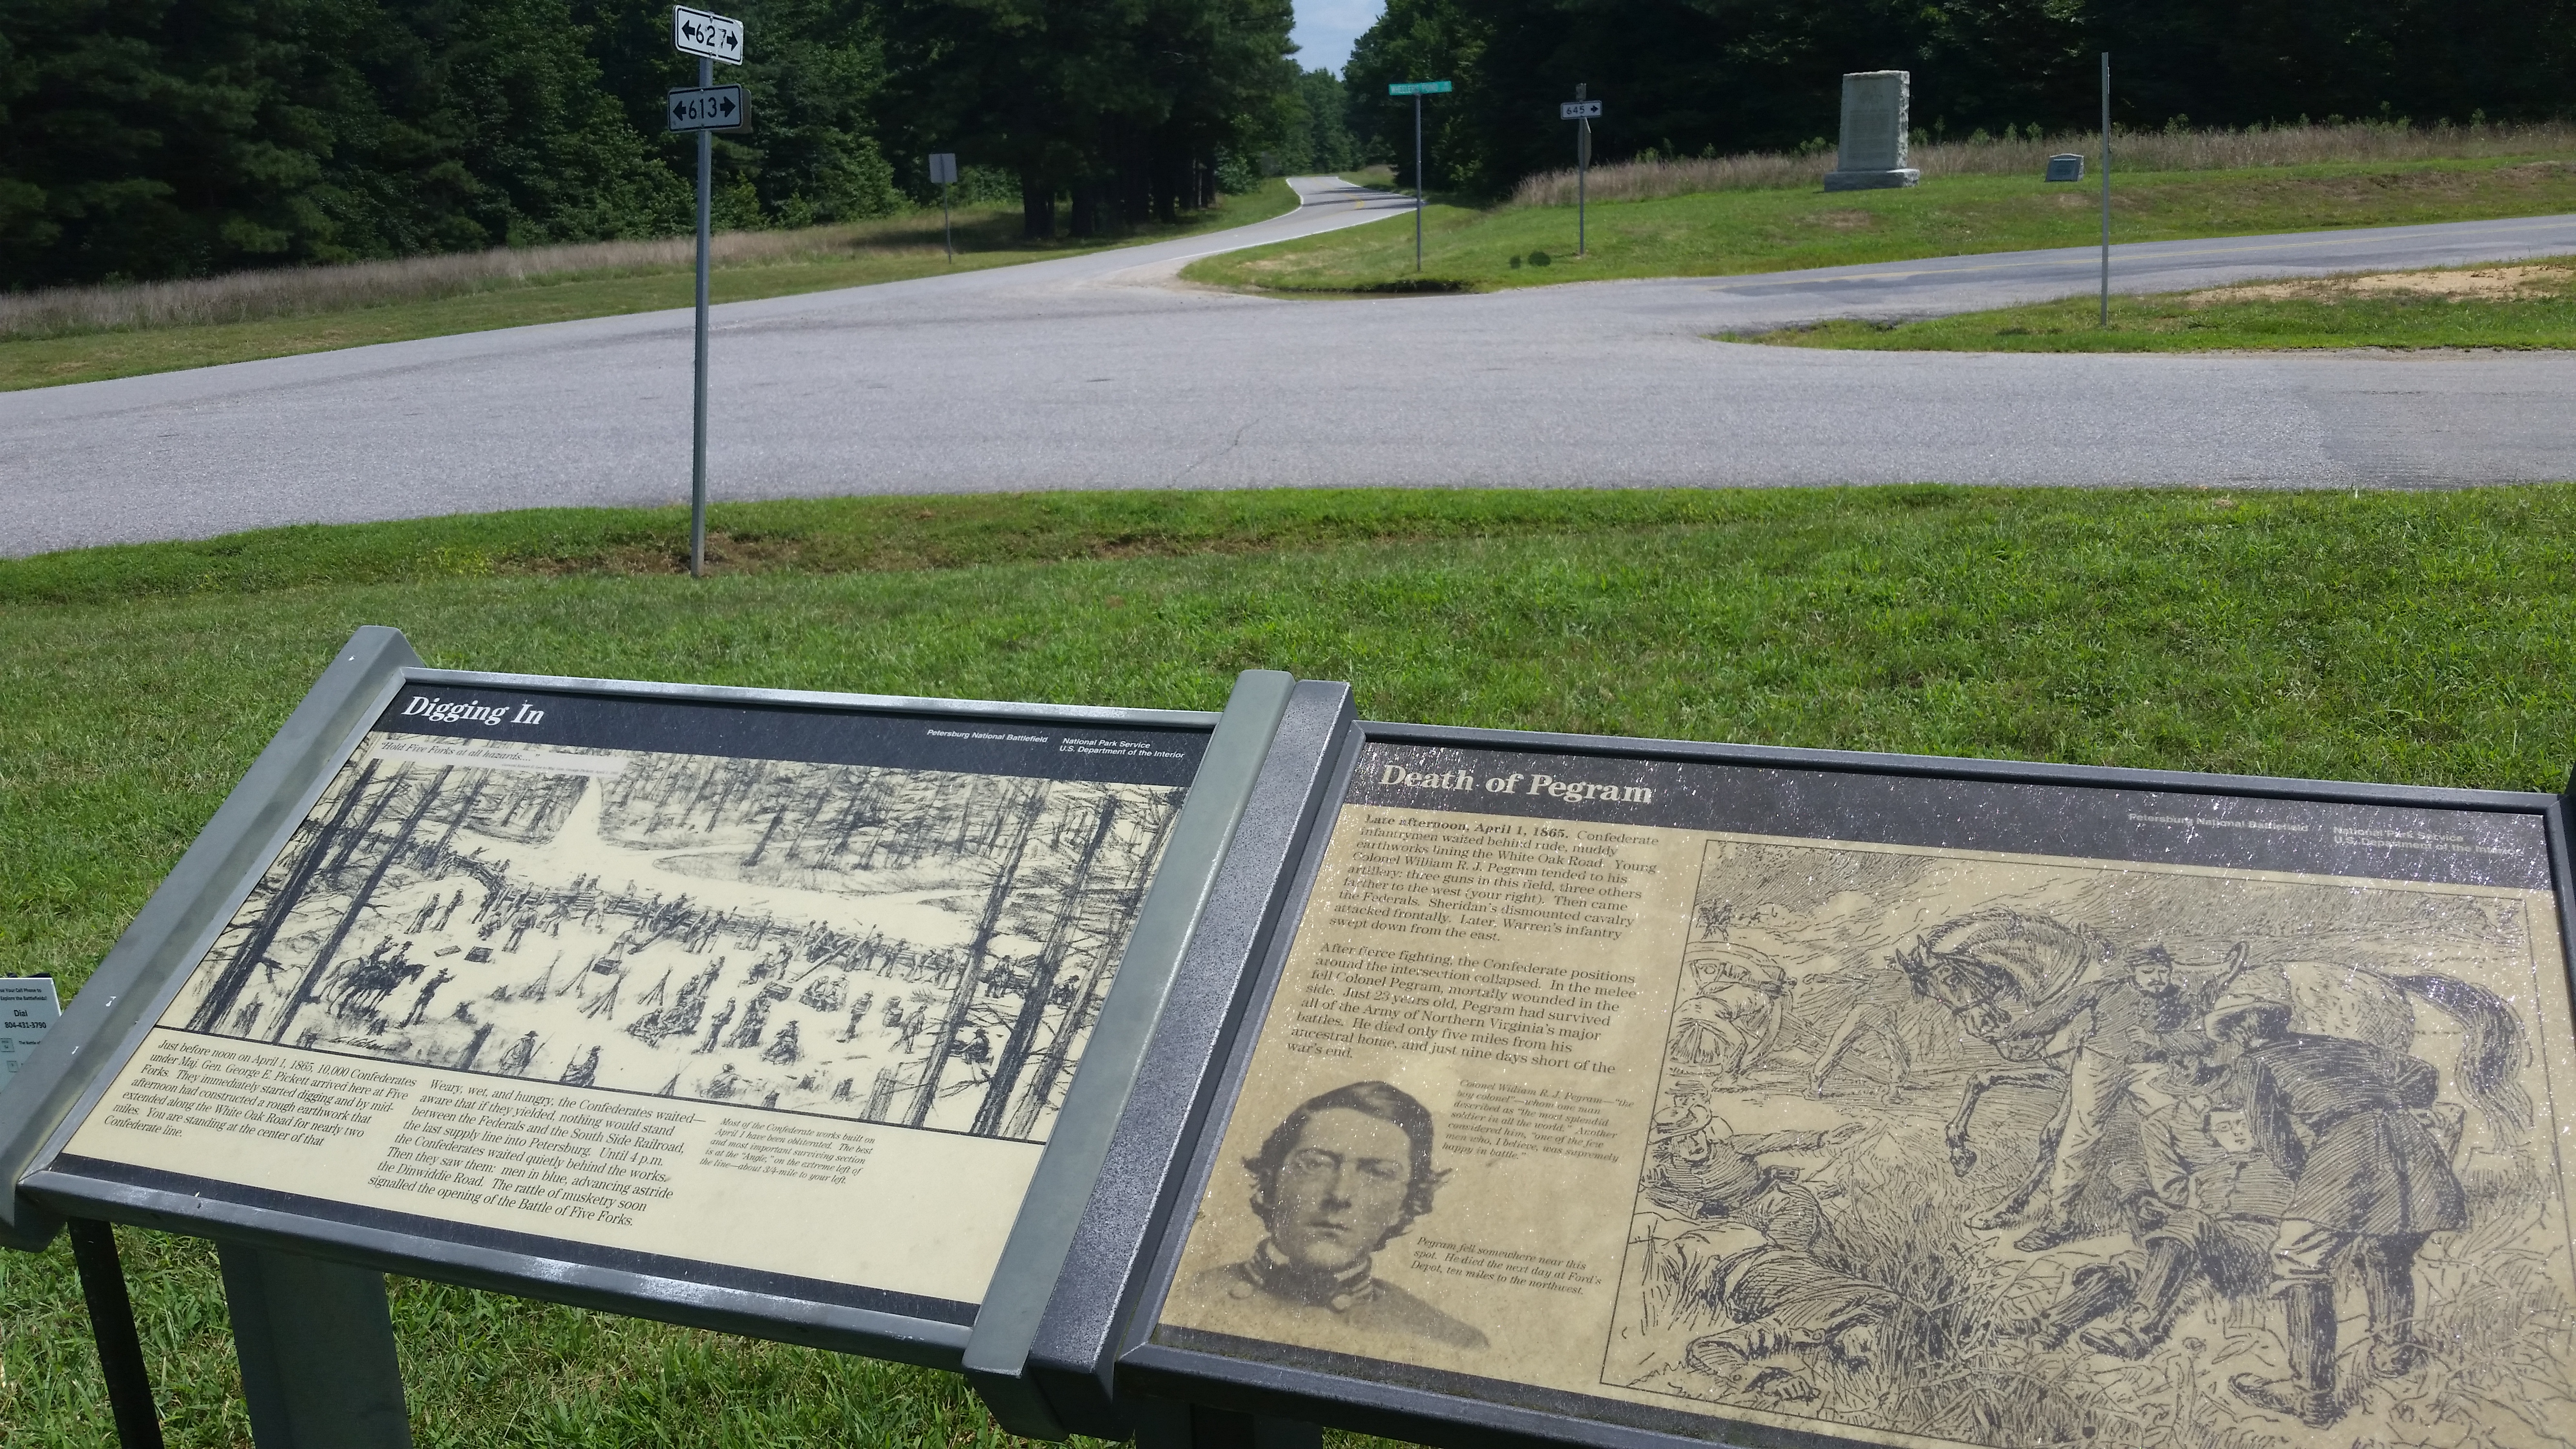 National Park Service markers for the Battle of Five Forks, looking south. Photo taken on August 6, 2016.